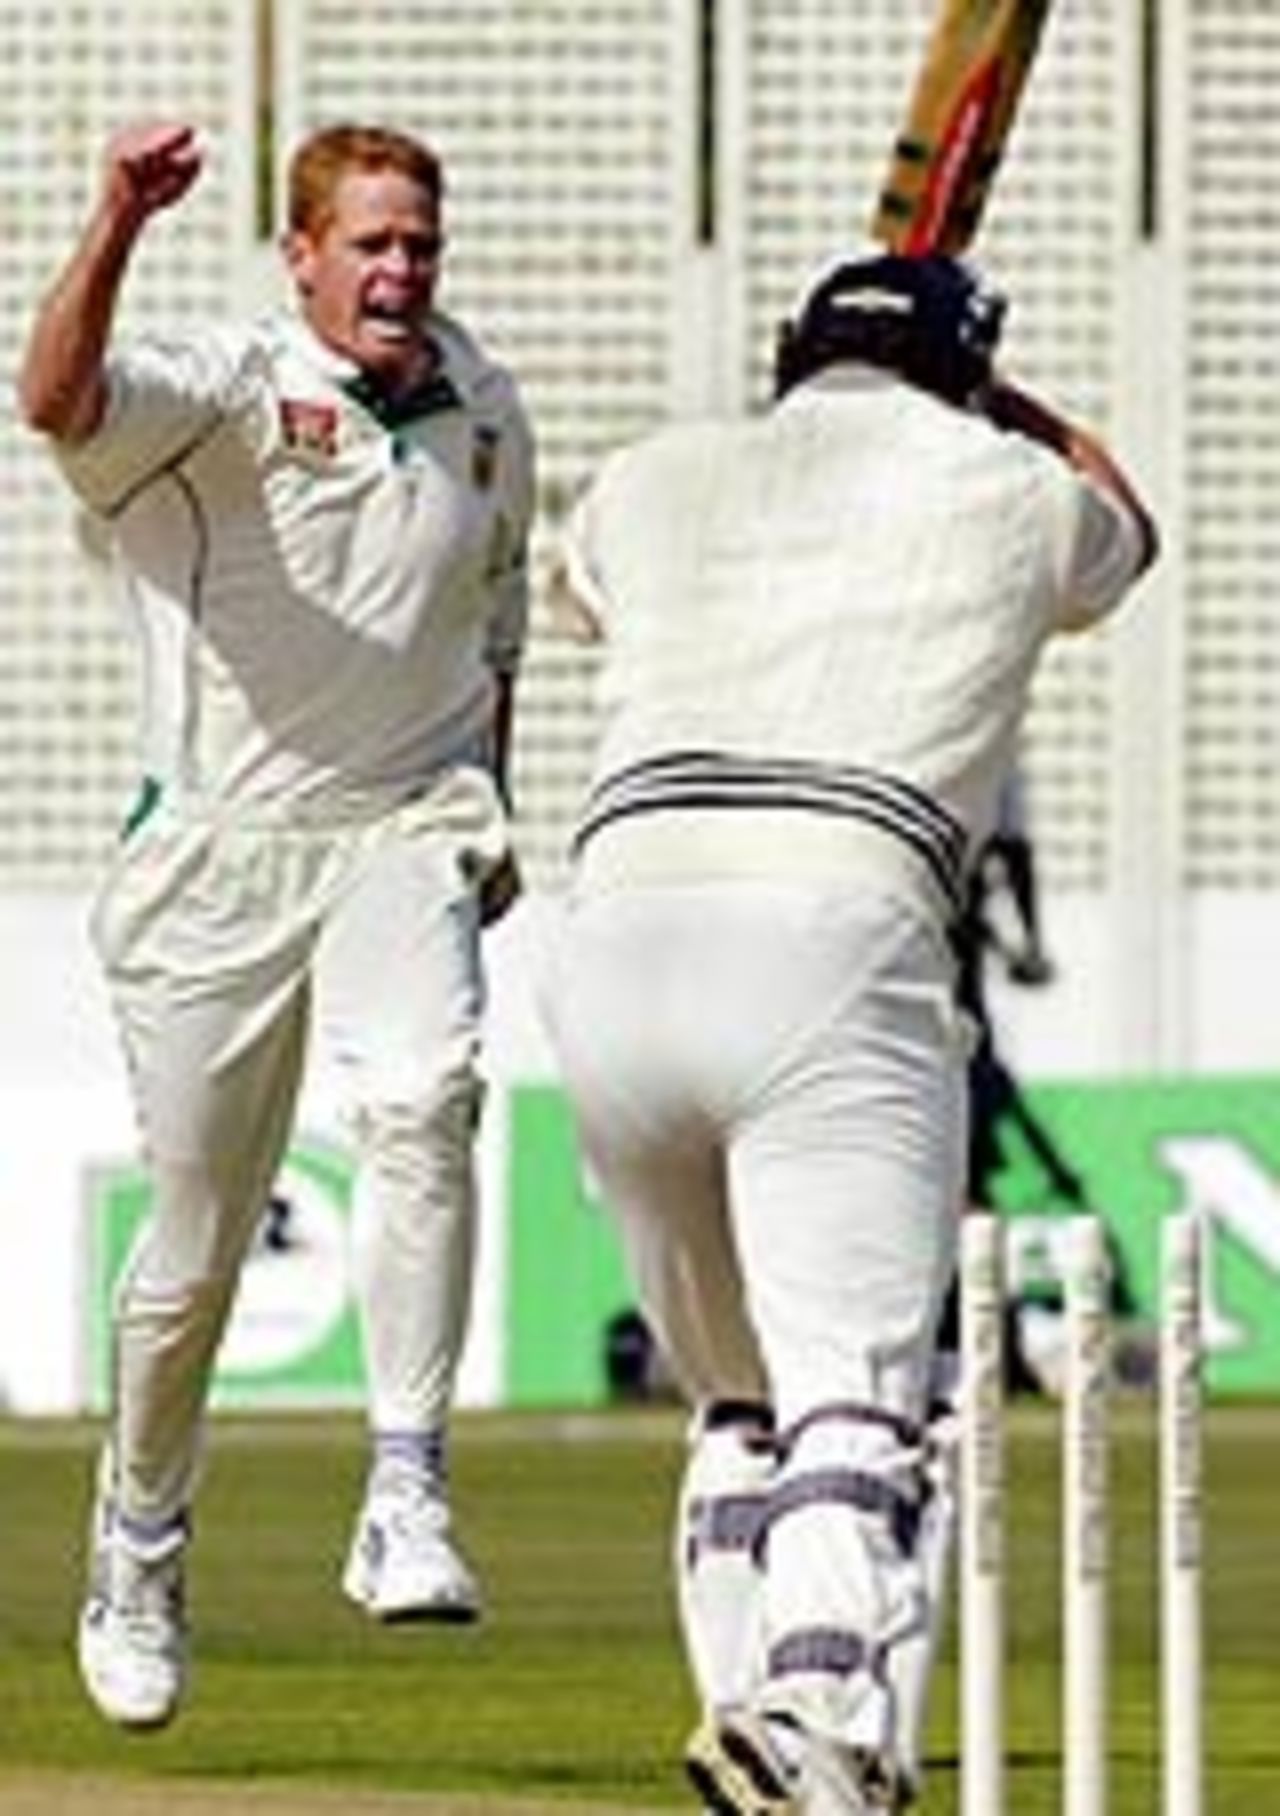 Shaun Pollock celebrates as Christ Cairns is bowled, New Zealand v South Africa, 3rd Test, Wellington, 2nd day, March 27, 2004